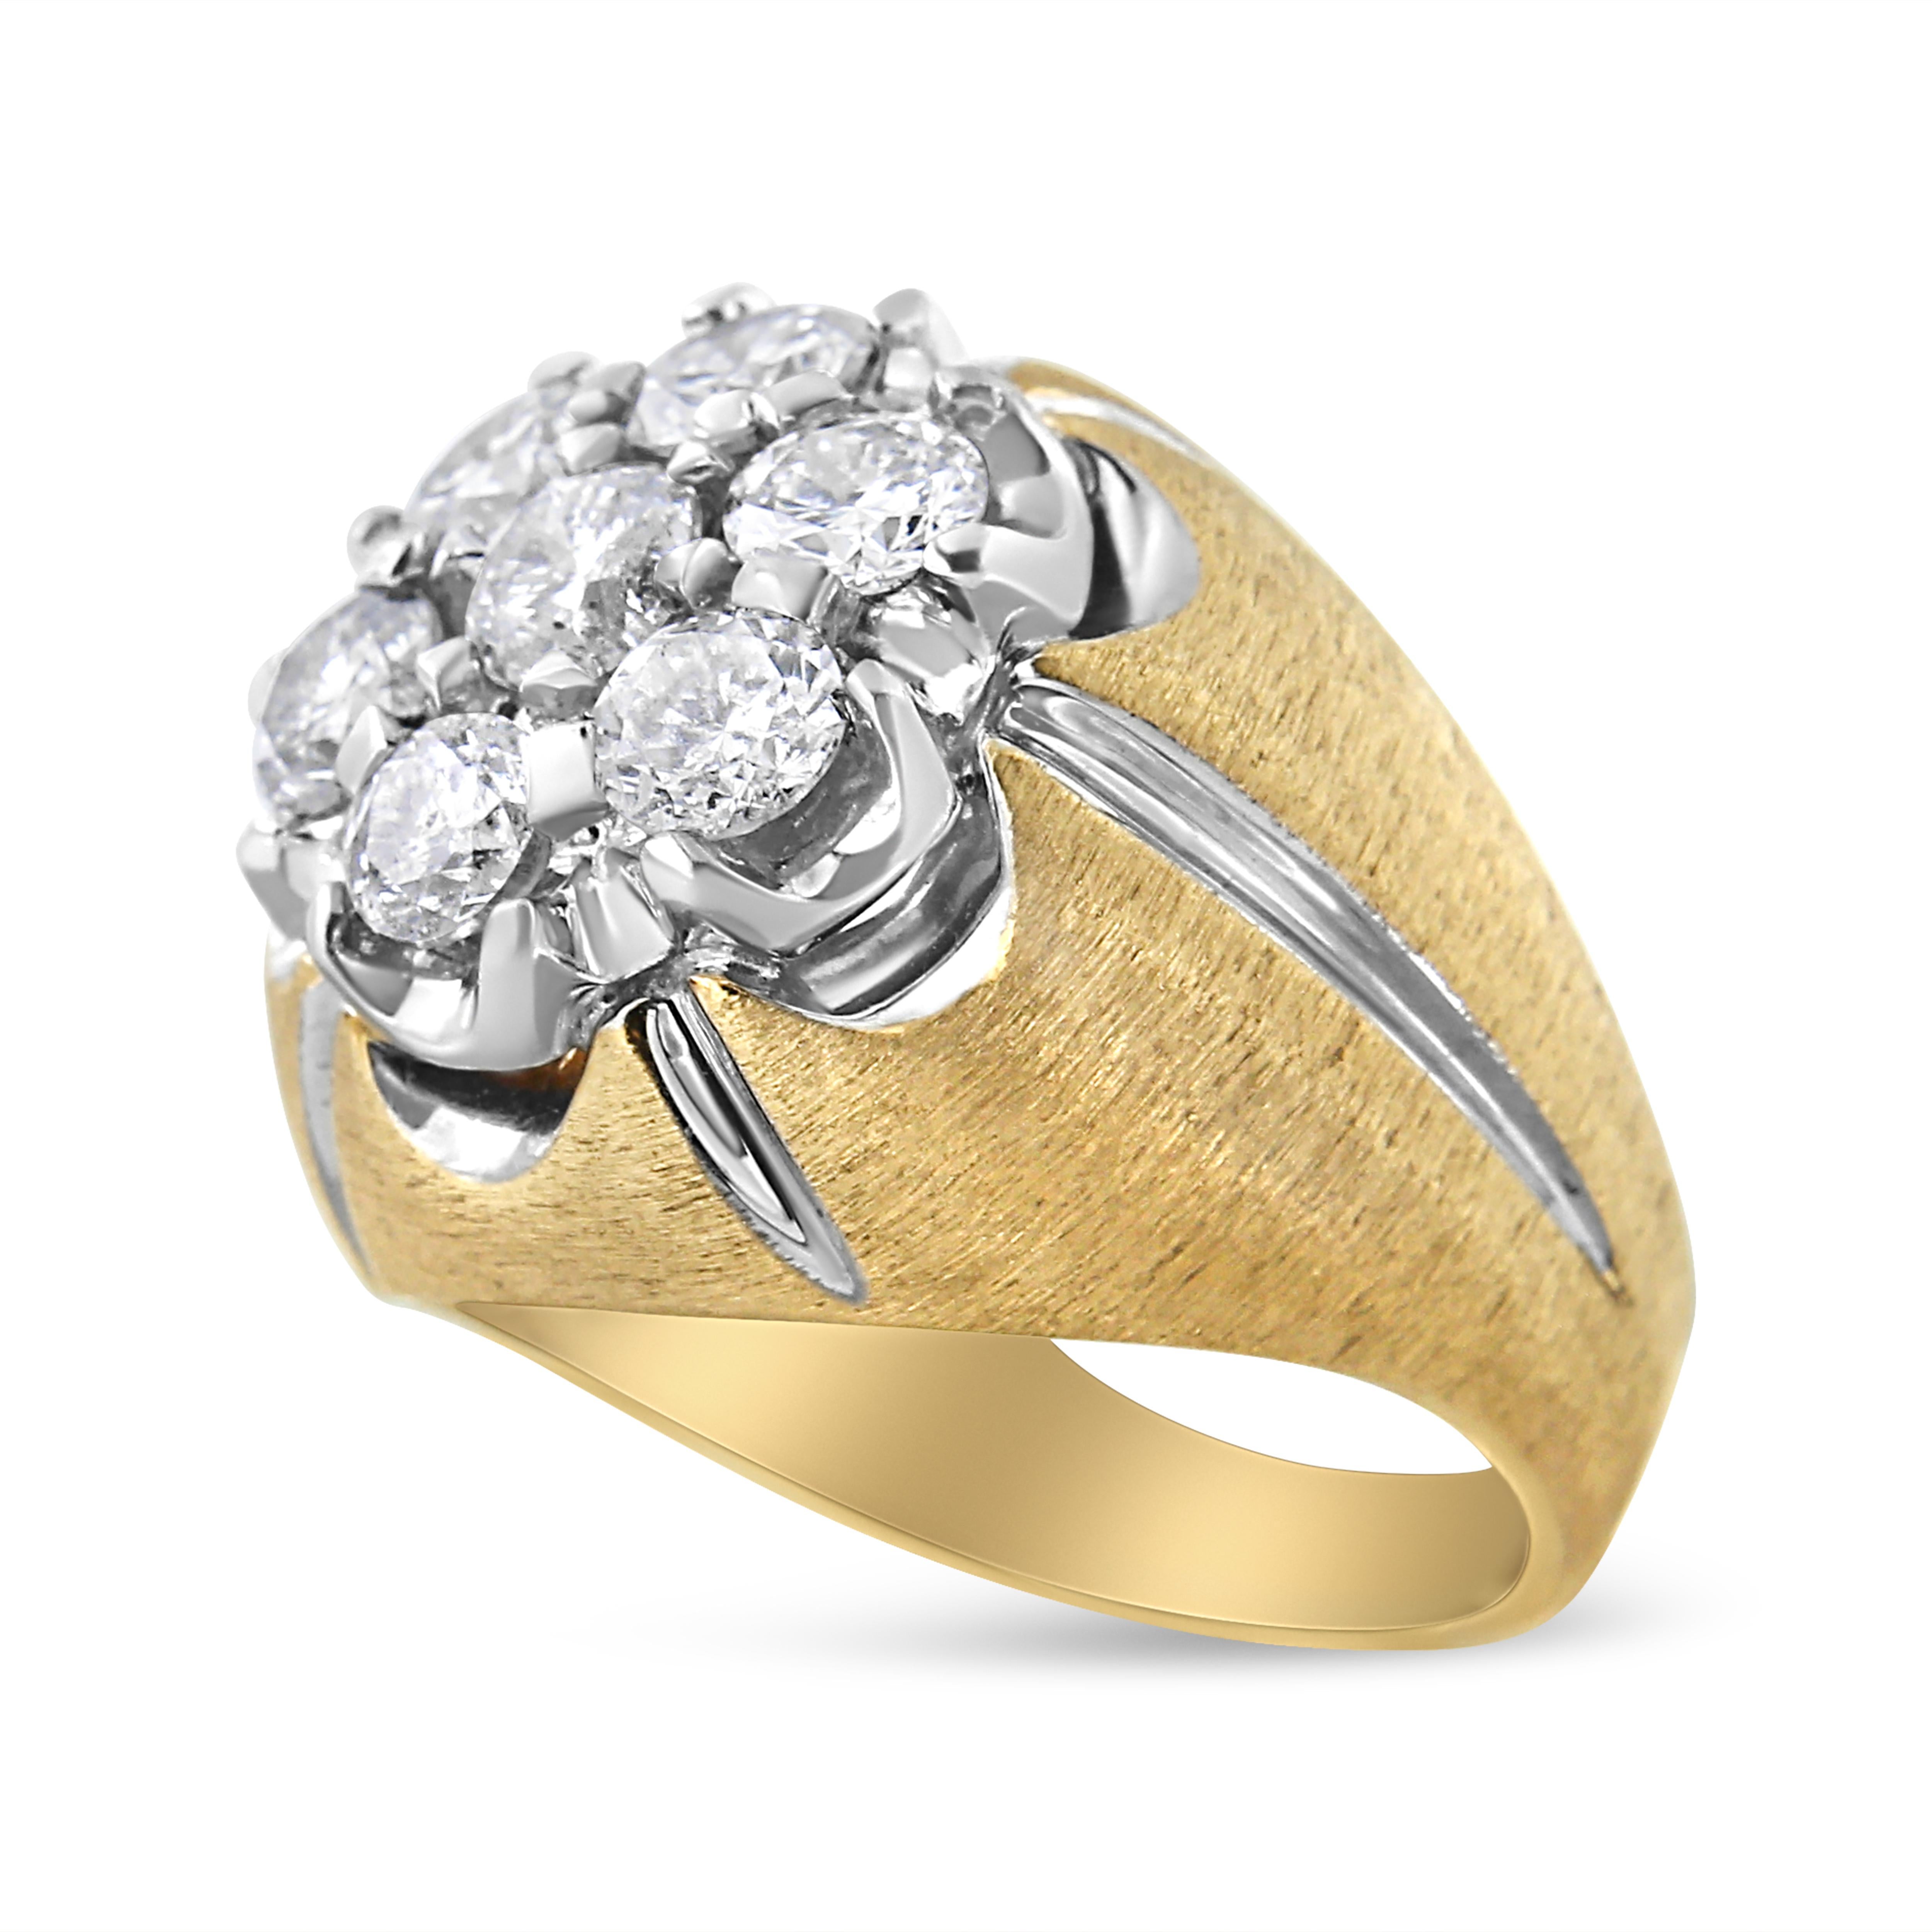 Bold and classic, this 14k yellow gold cluster band is set with 7 natural, round-cut diamonds in a strong prong setting. This yellow gold band has streaks of white gold coming down from the 3 carat cluster of diamonds at the center. The ring